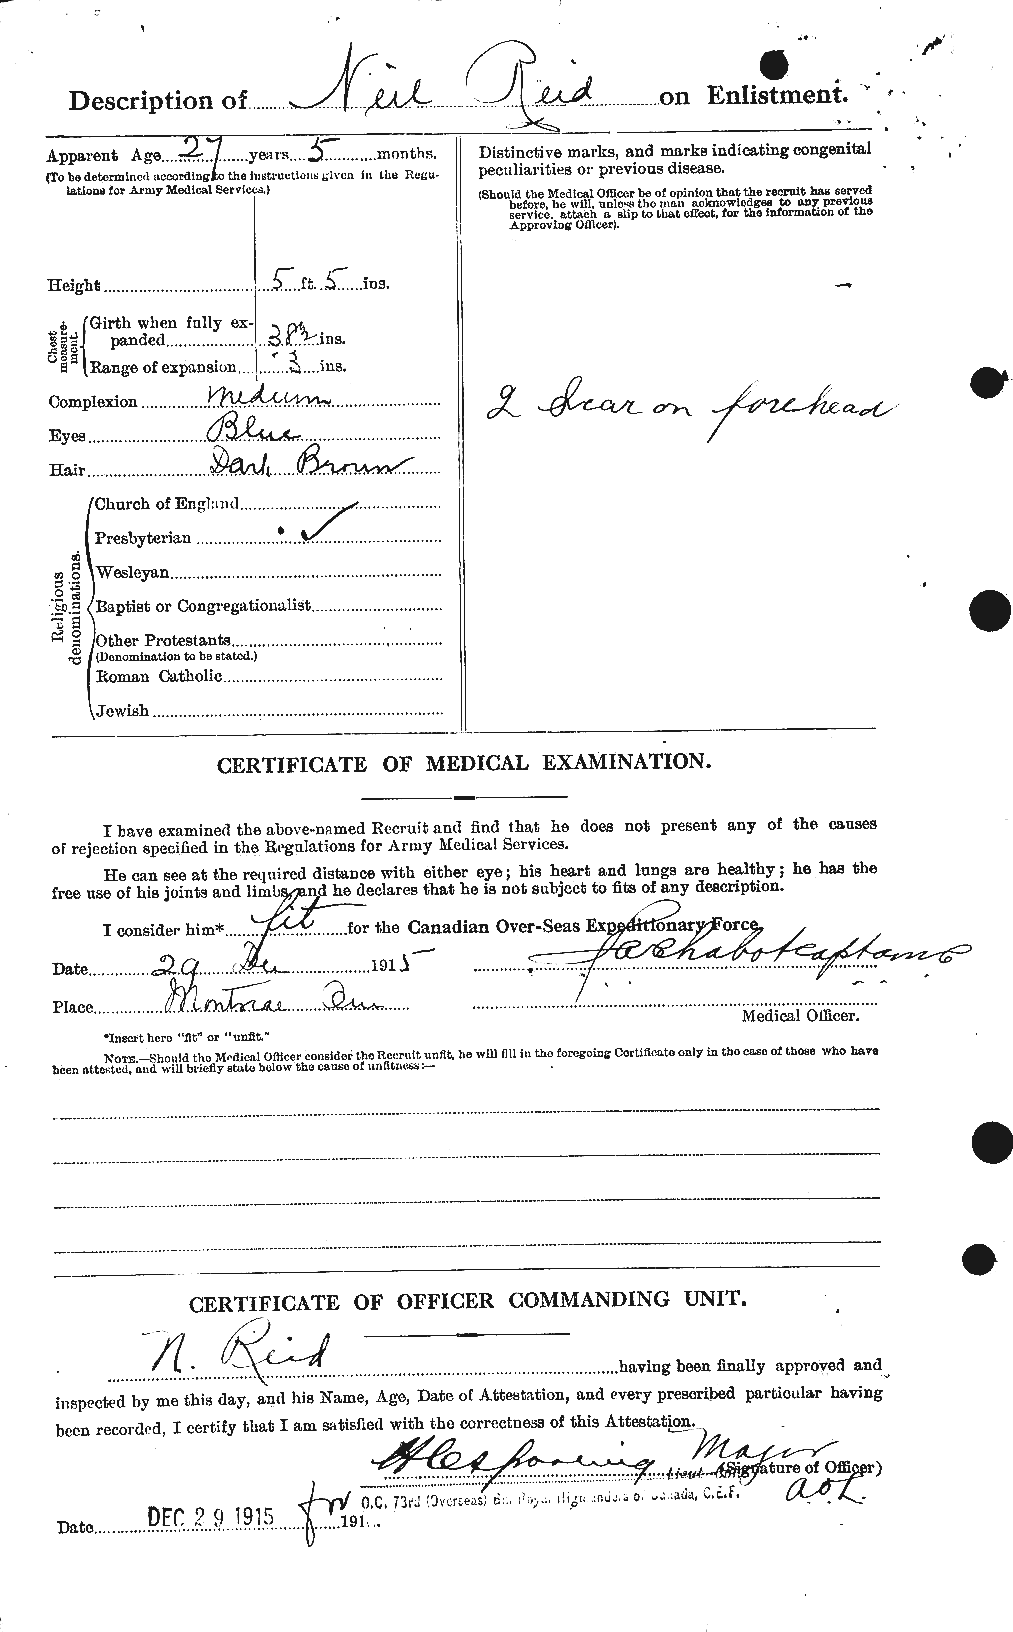 Personnel Records of the First World War - CEF 598958b